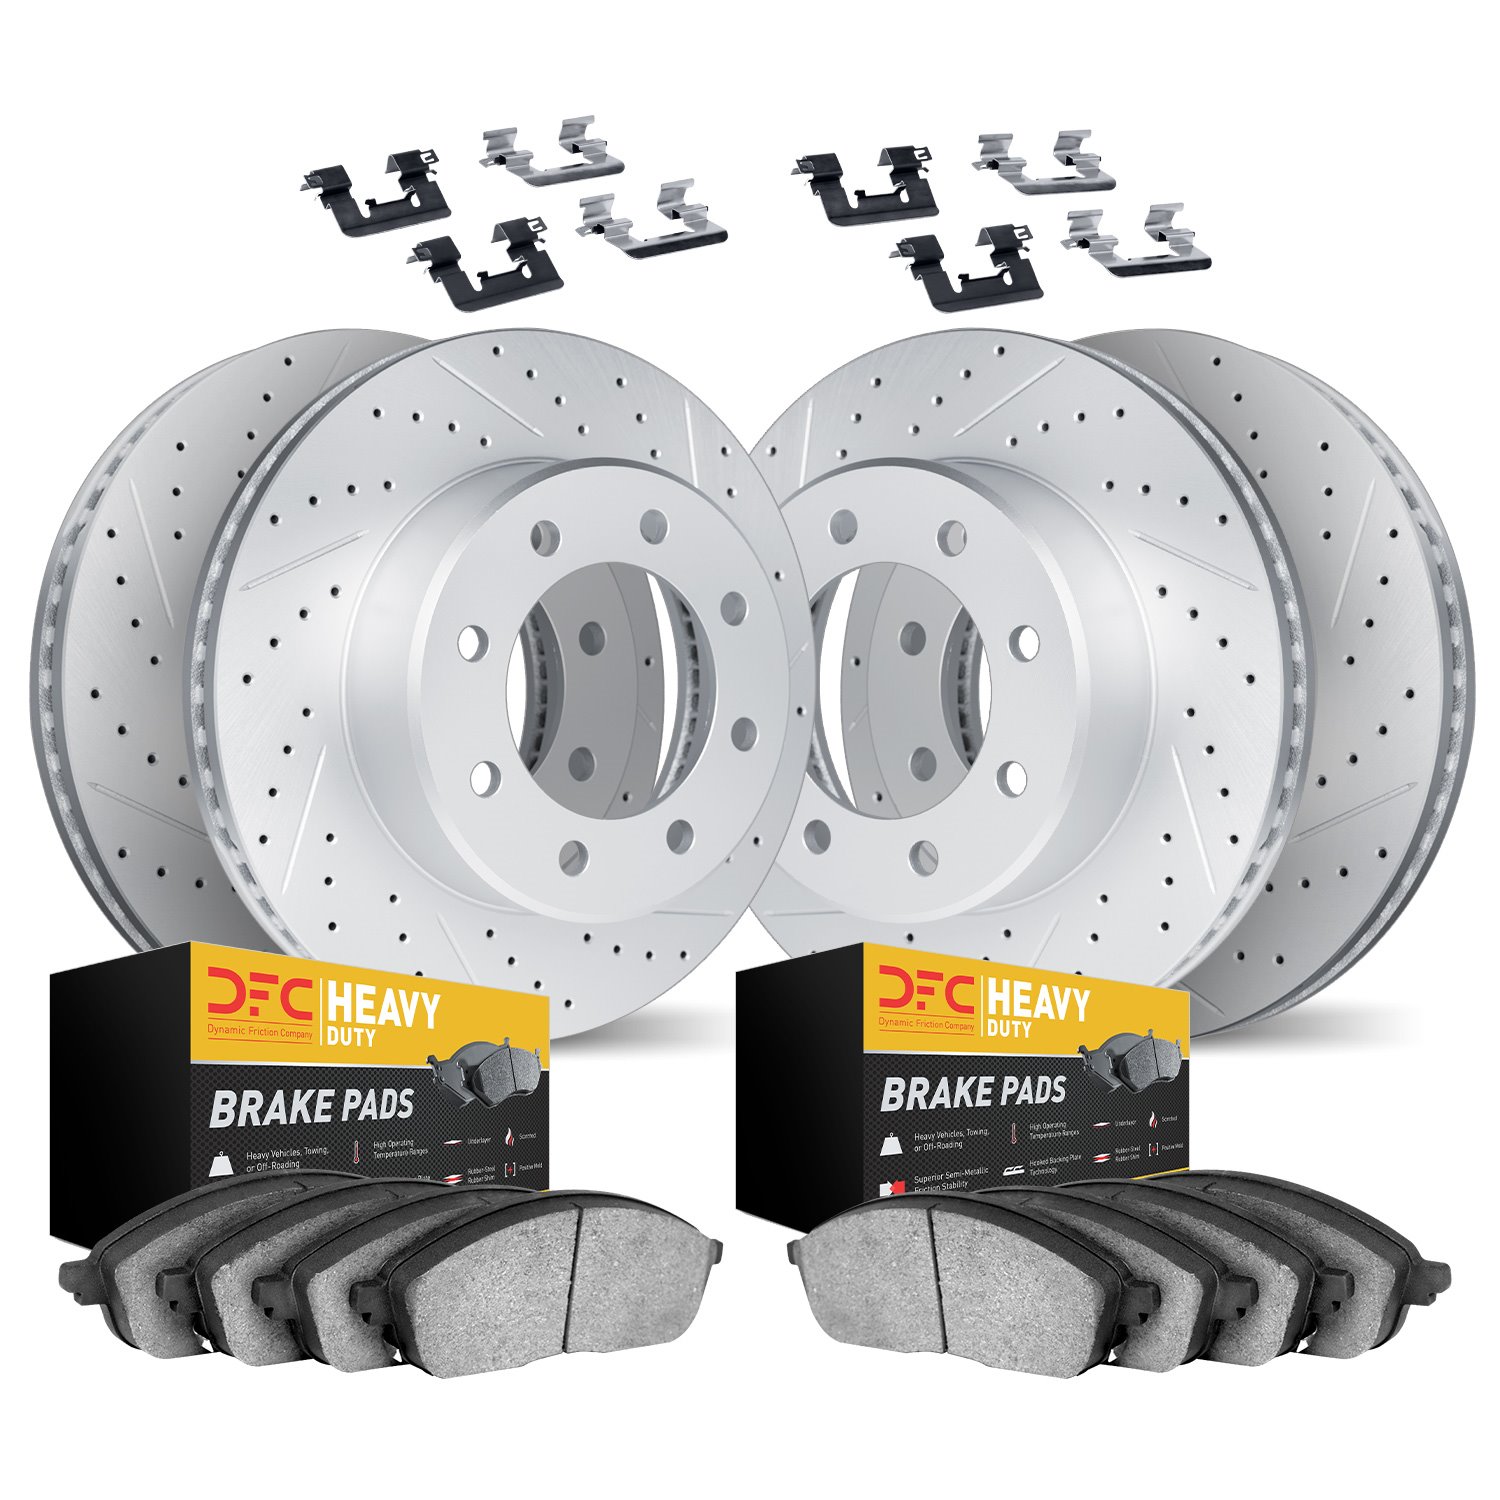 2214-99079 Geoperformance Drilled/Slotted Rotors w/Heavy-Duty Pads Kit & Hardware, 2006-2010 Ford/Lincoln/Mercury/Mazda, Positio